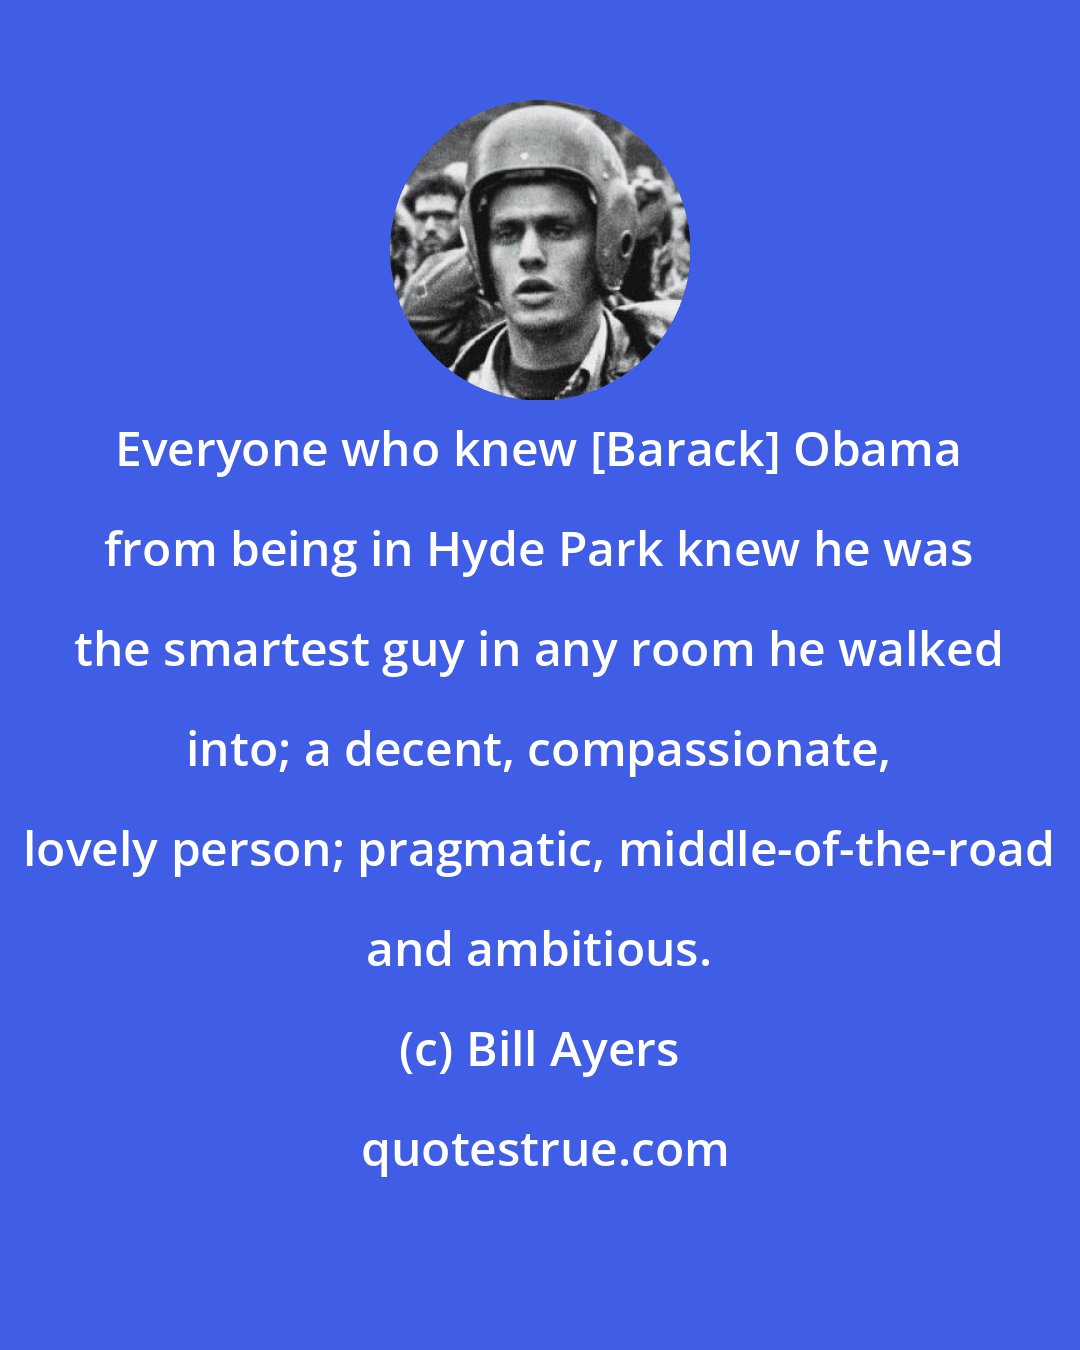 Bill Ayers: Everyone who knew [Barack] Obama from being in Hyde Park knew he was the smartest guy in any room he walked into; a decent, compassionate, lovely person; pragmatic, middle-of-the-road and ambitious.